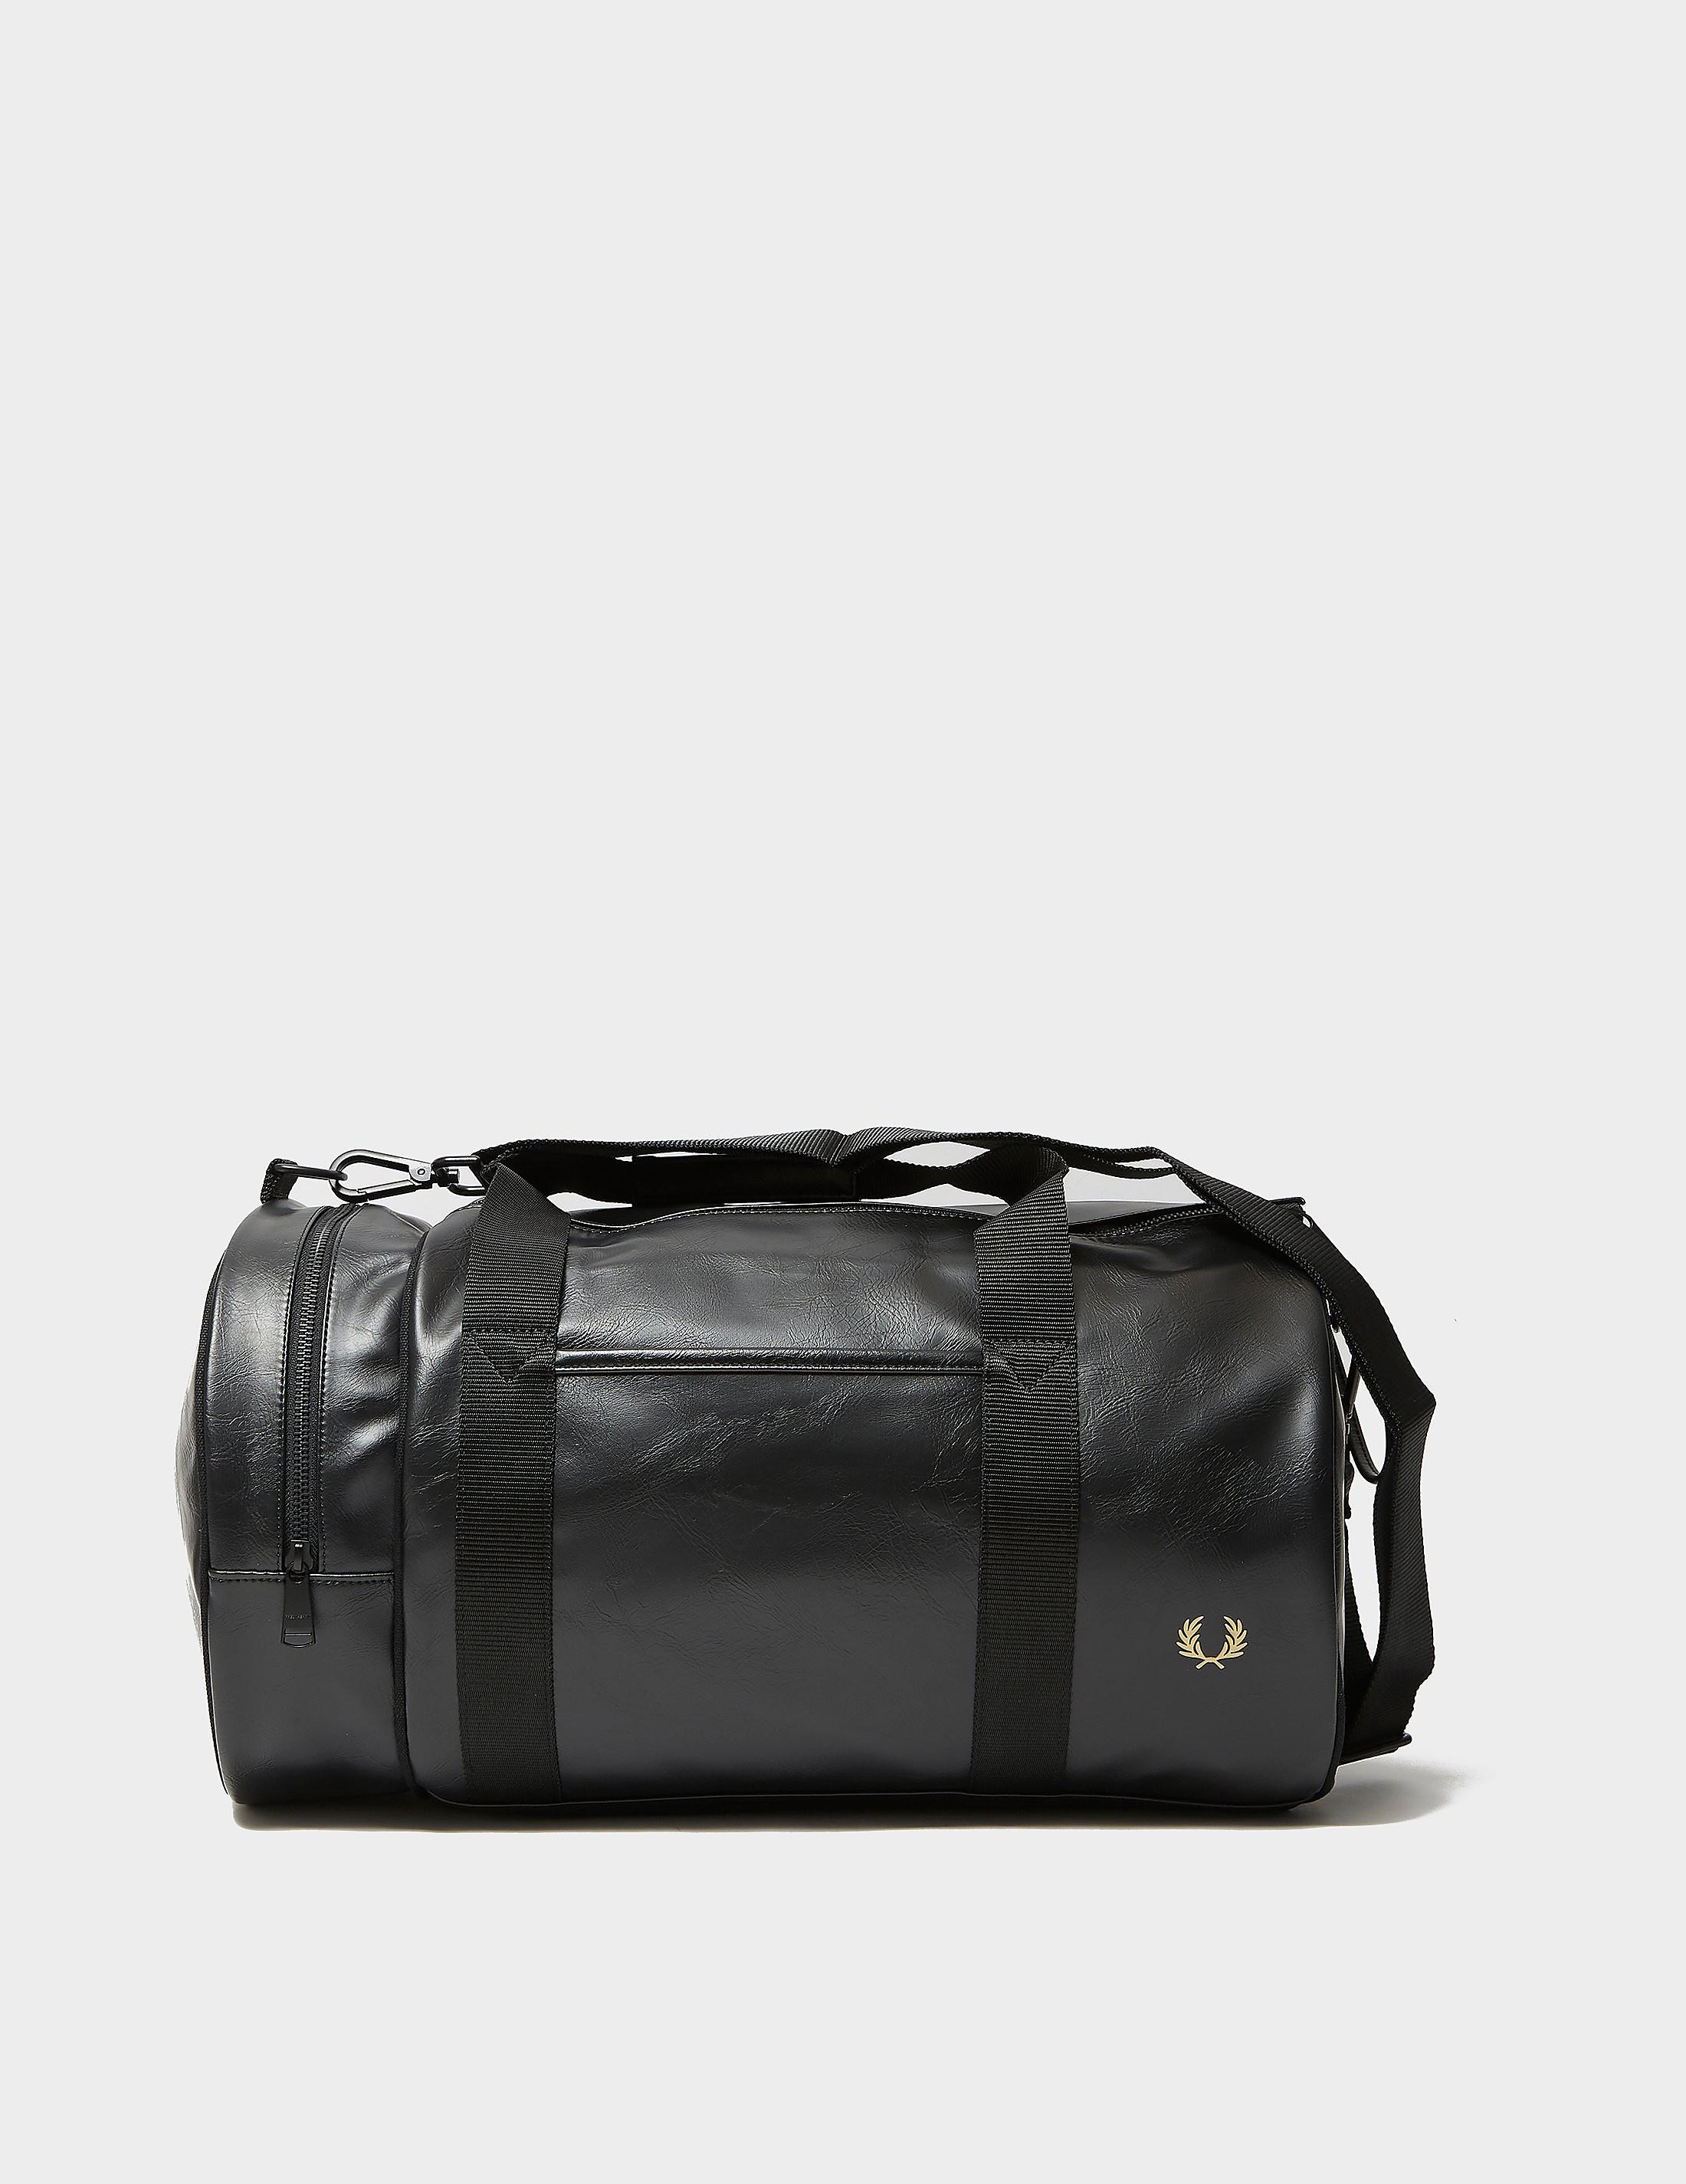 Fred Perry Leather Tonal Barrel Bag in Black for Men - Lyst